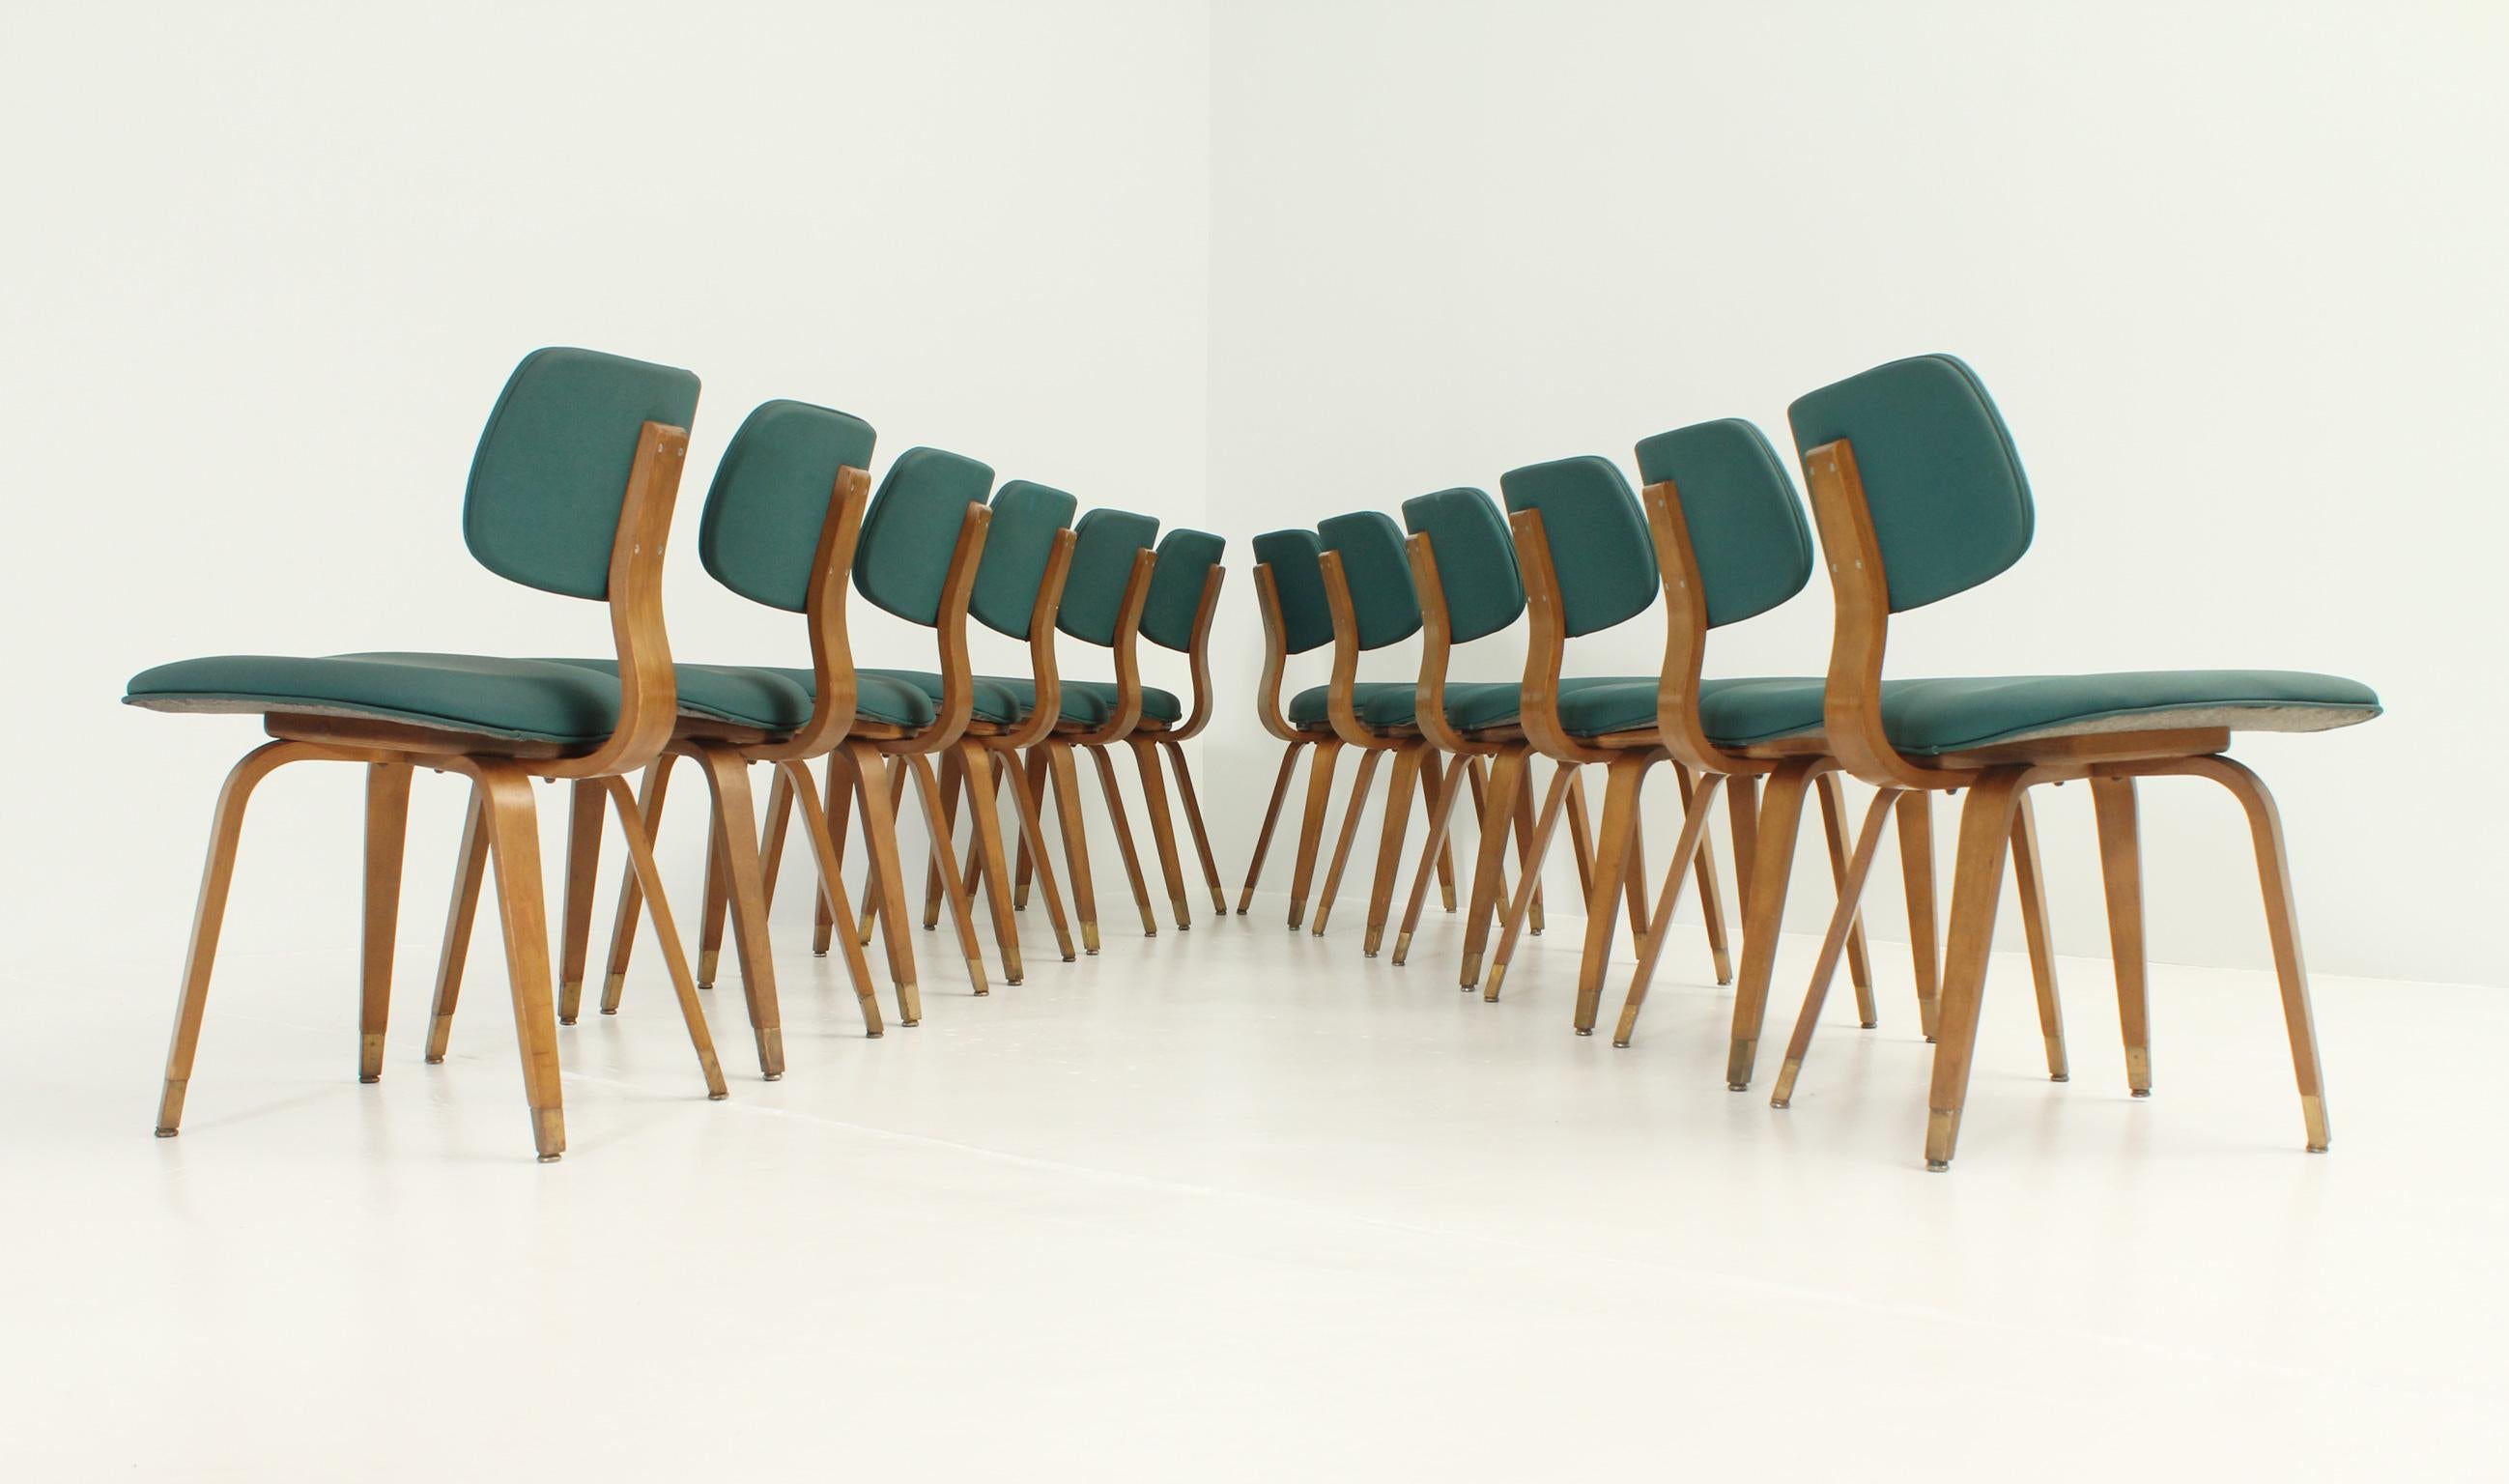 Set of twelve chairs designed in 1950's by Joe Atkinson for Thonet, USA, only produced in the States. Birch plywood, brass fittings and original green vinyl.